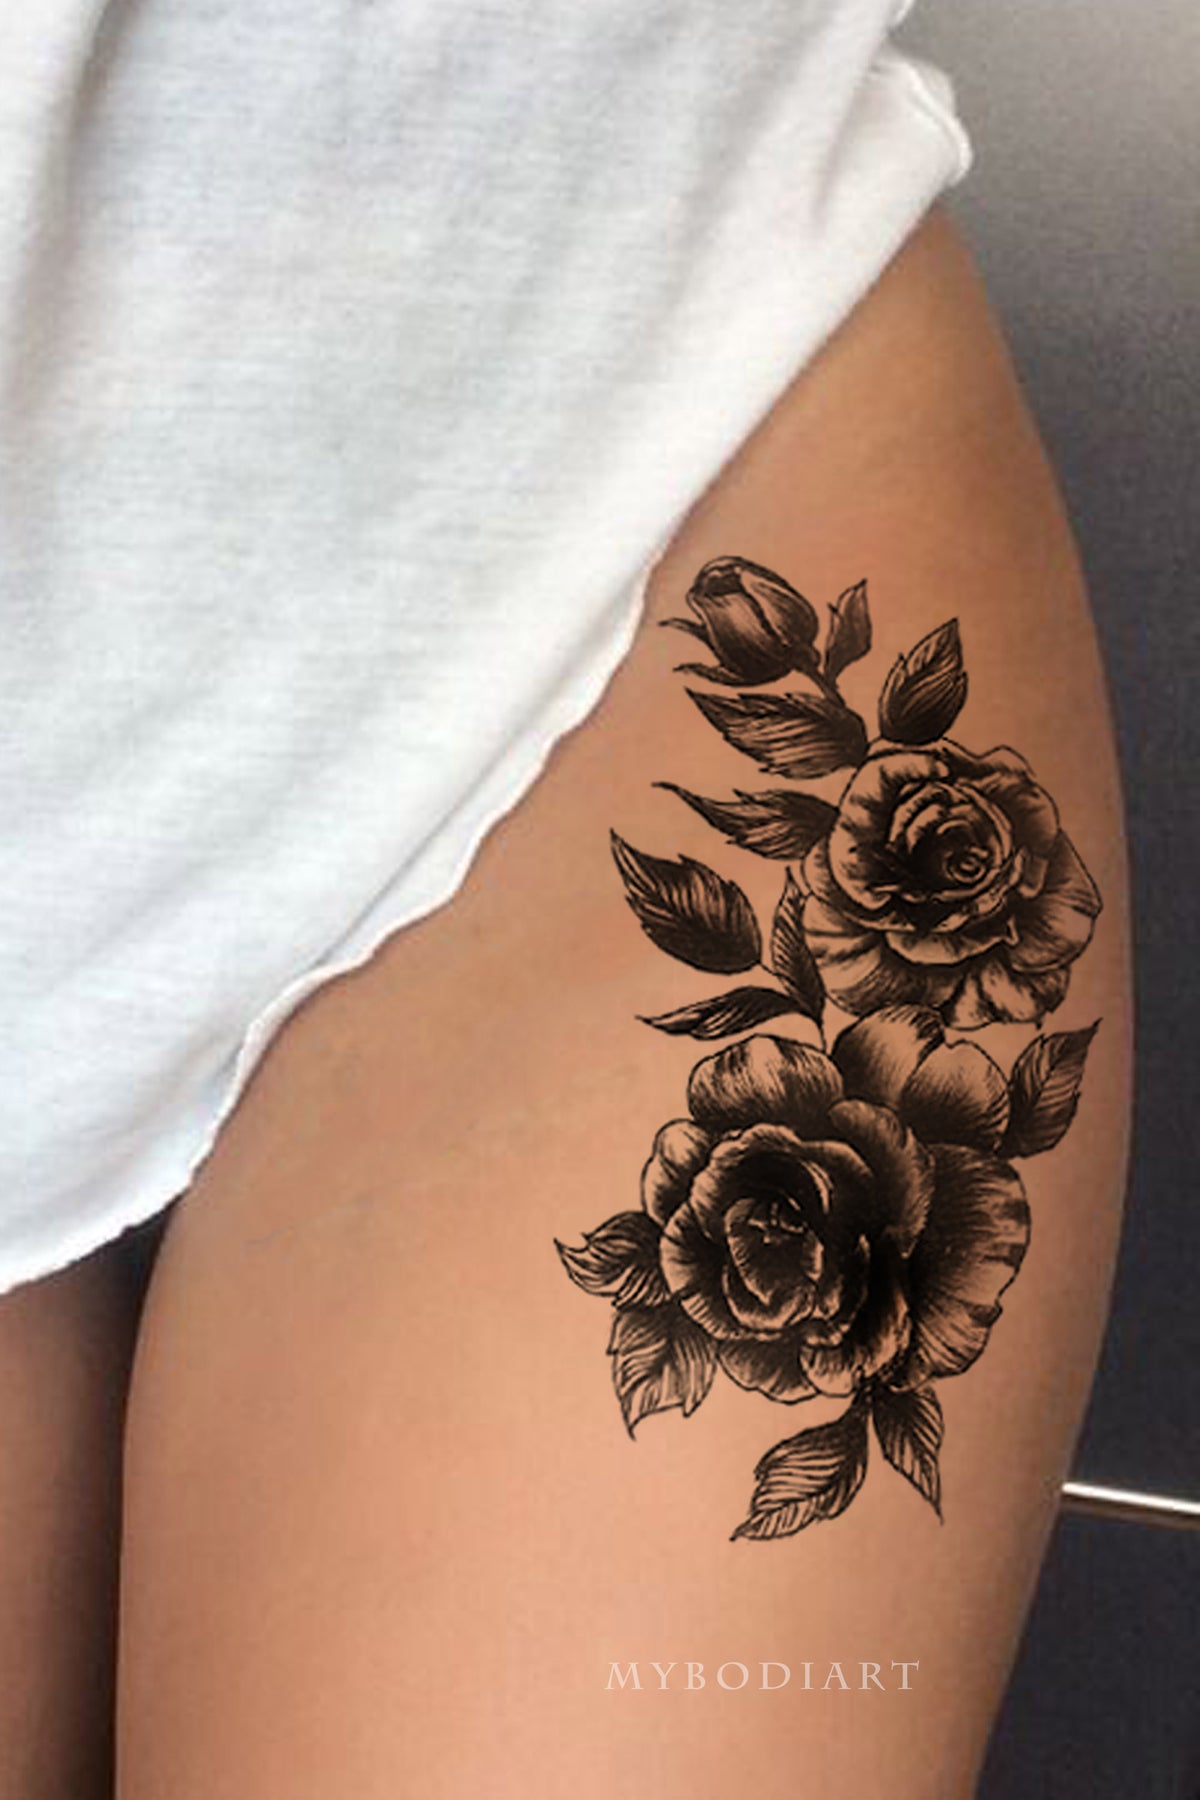 The Black Rose Tattoo Parlour  Whipped this on Alex today so fun   linework feminine soft simple roses thightattoo blackandgrey tattoo  blackrosetattoo whip ladytattooers  Facebook